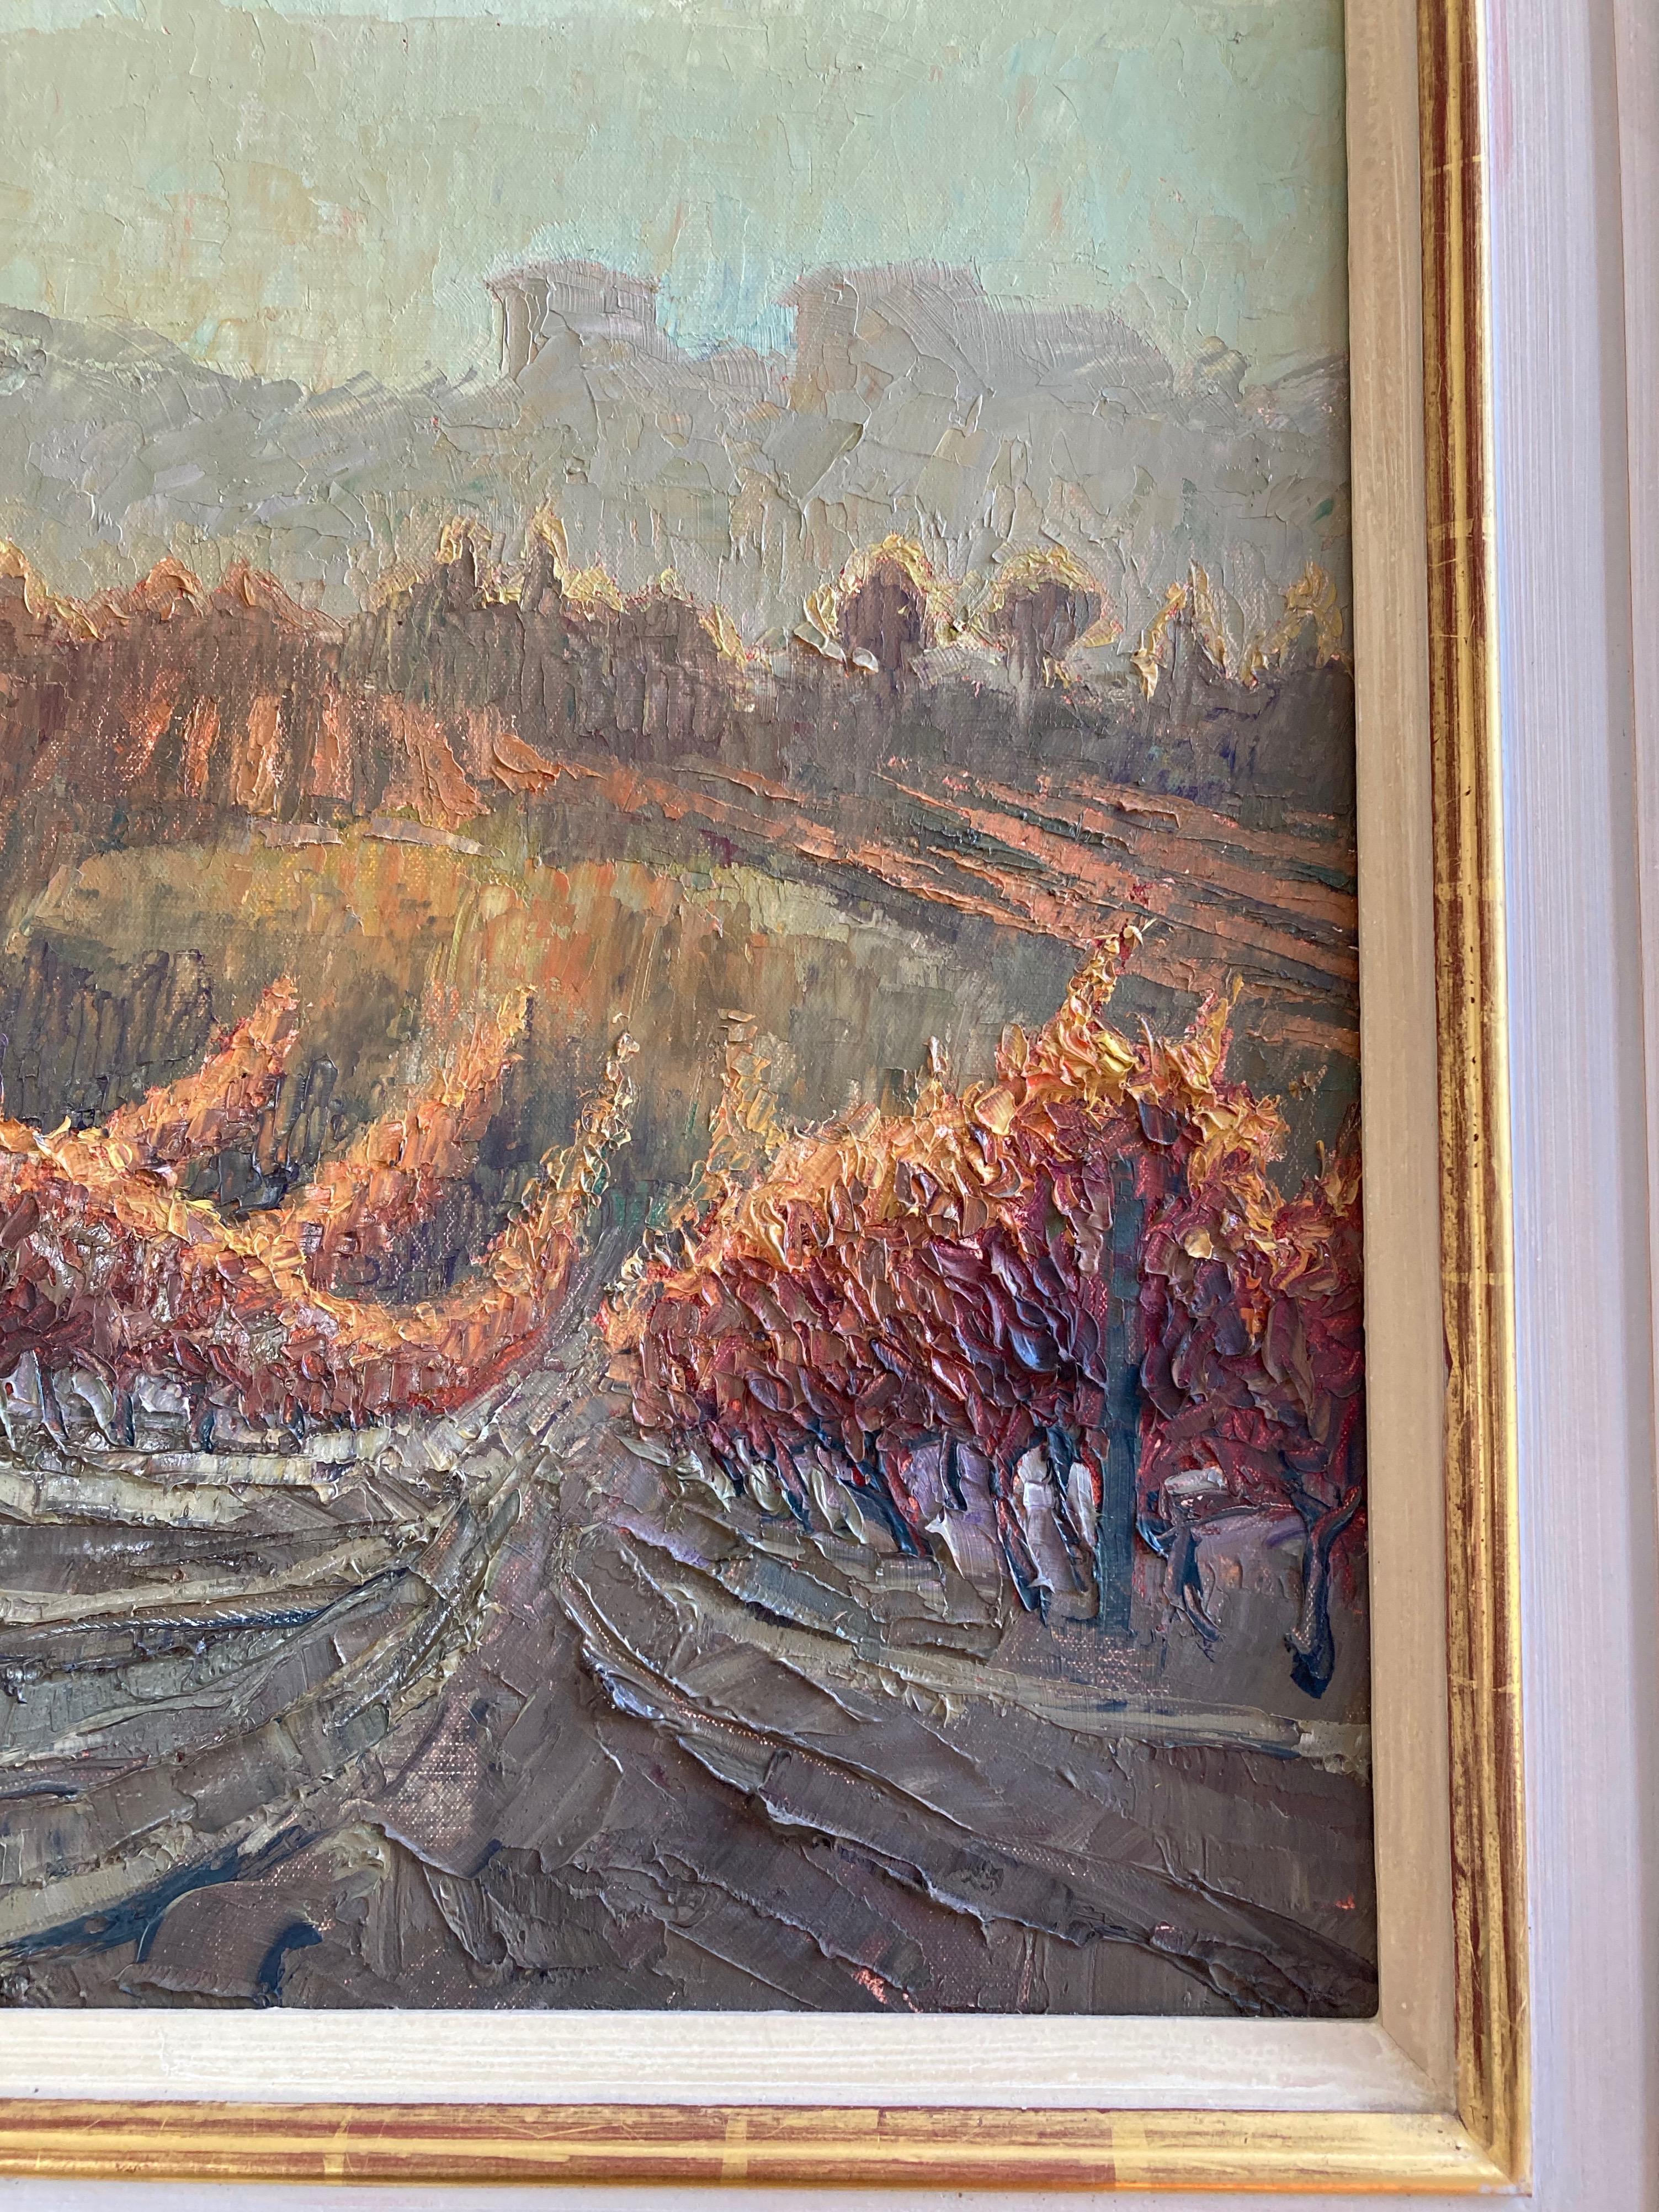 A wonderful view of an Italian vineyard in the Piedmont (or Piemonte) region in North West Italy. The scene is painted with wonderful impasto, the fiery palette sculpted with a palette knife to give fabulous texture. A really striking piece that